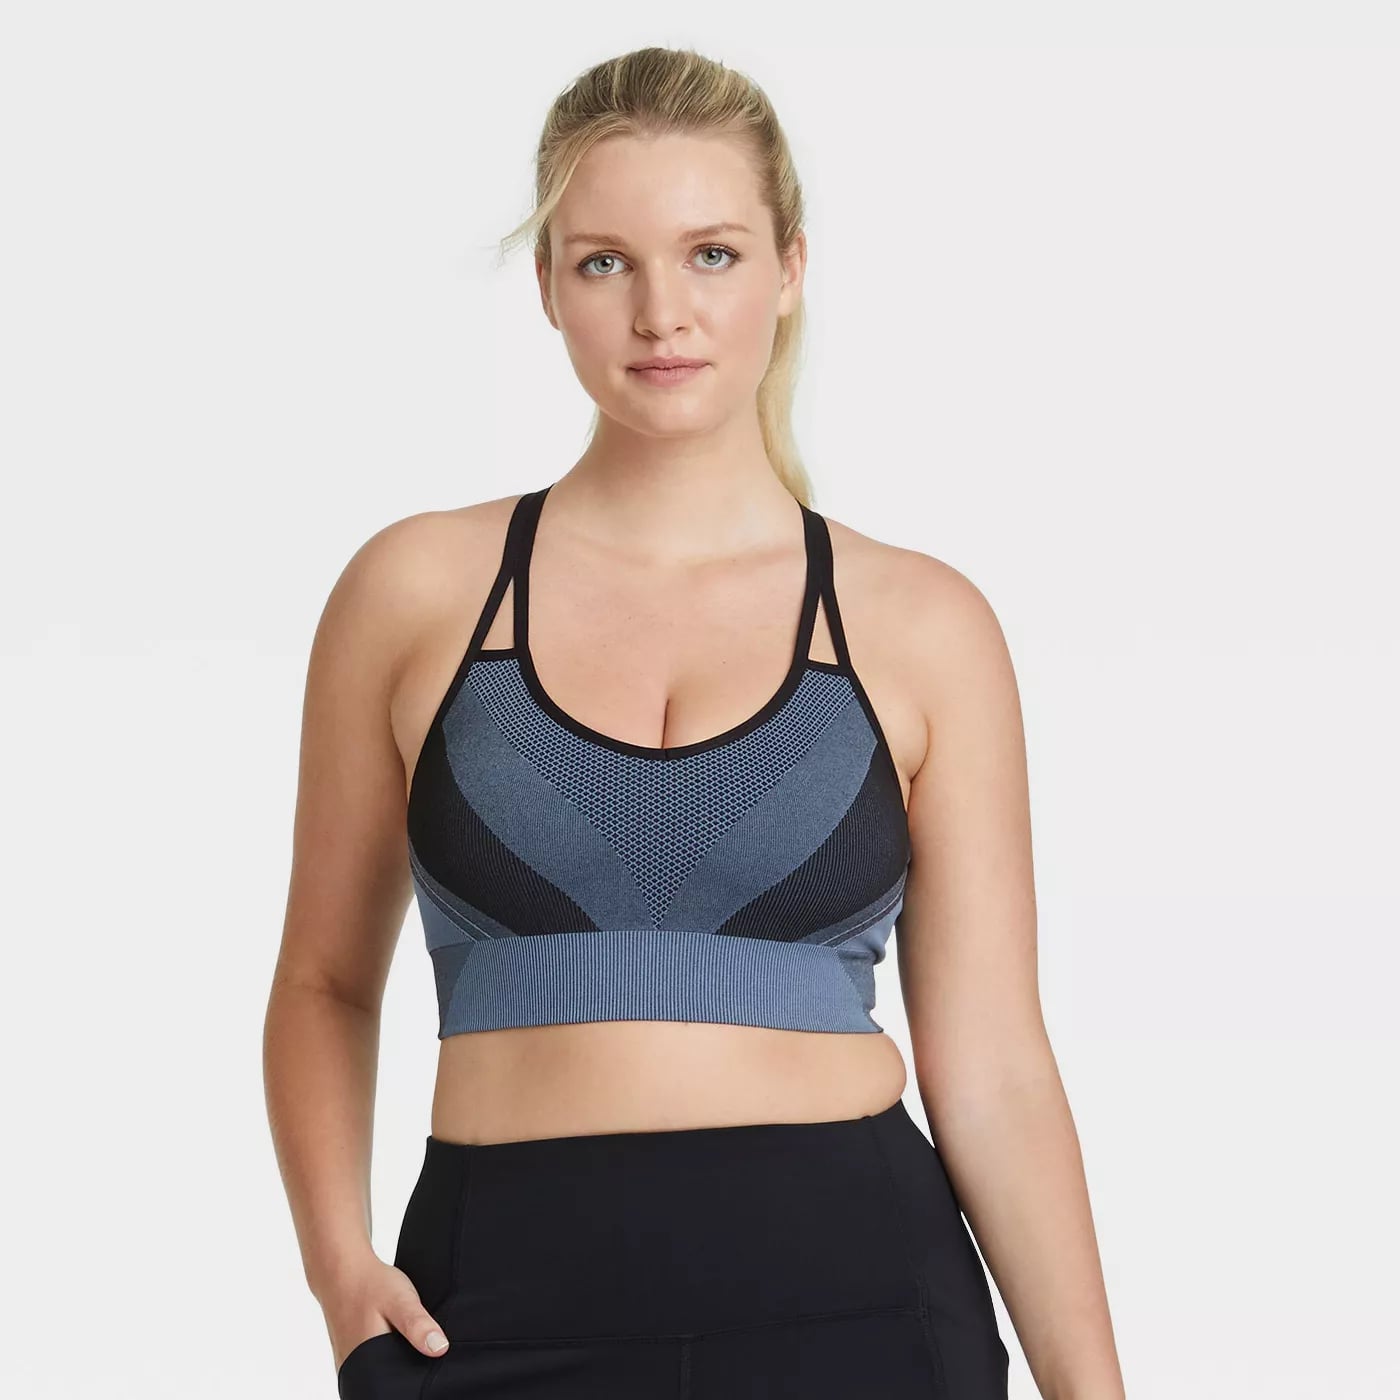 All In Motion seamless sports bra Size M - $10 - From suzy